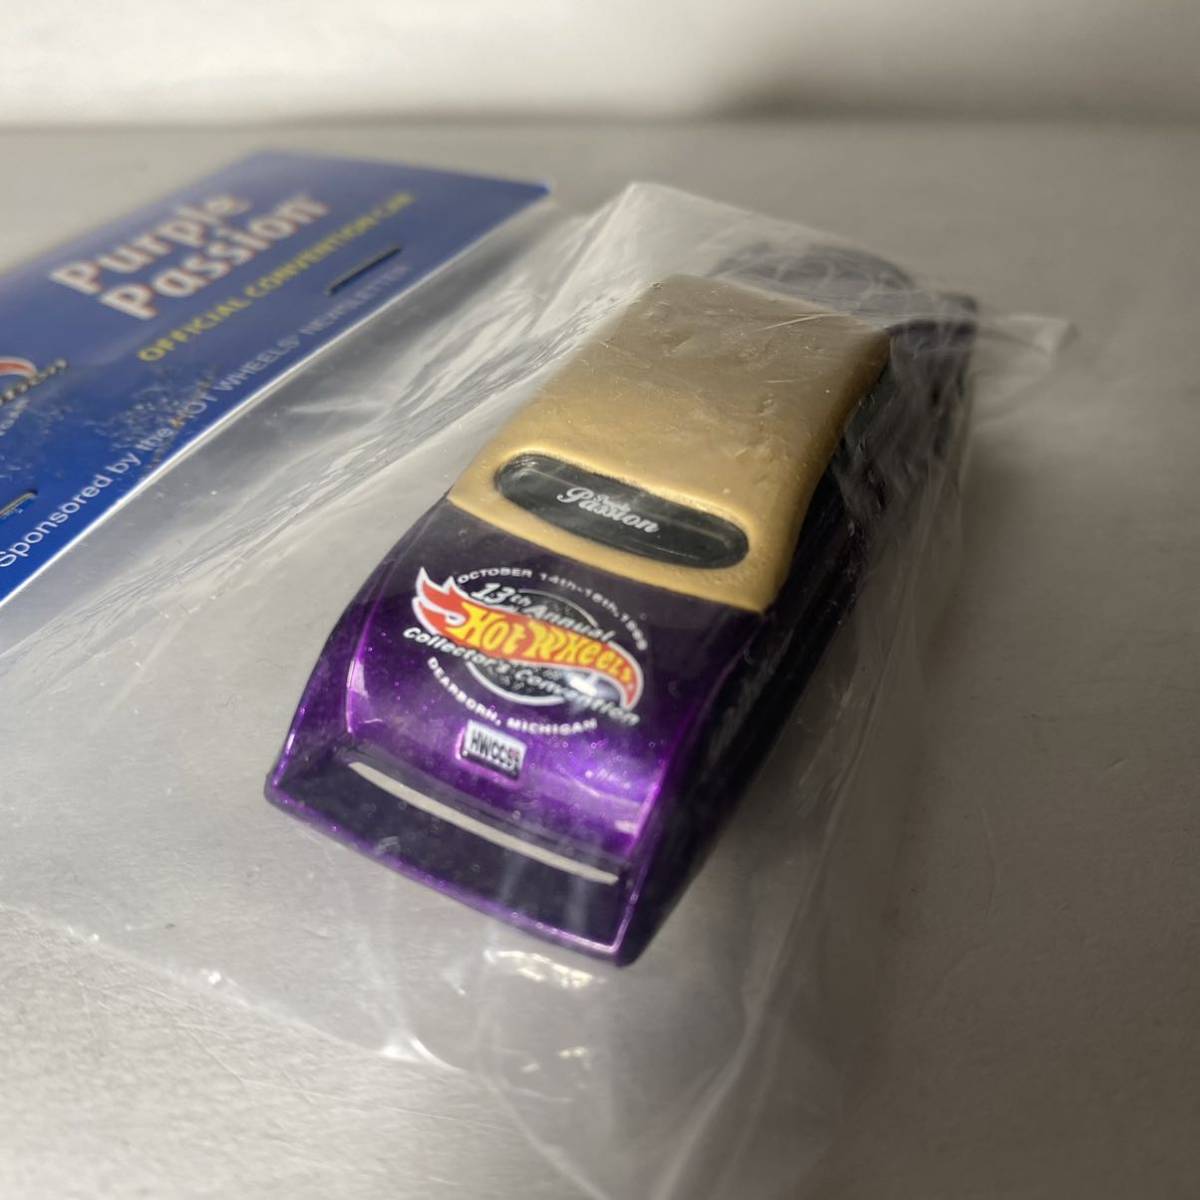 Hot Wheels 13th Annual collectors convention purple passion 1999 newsletter パッション_画像7